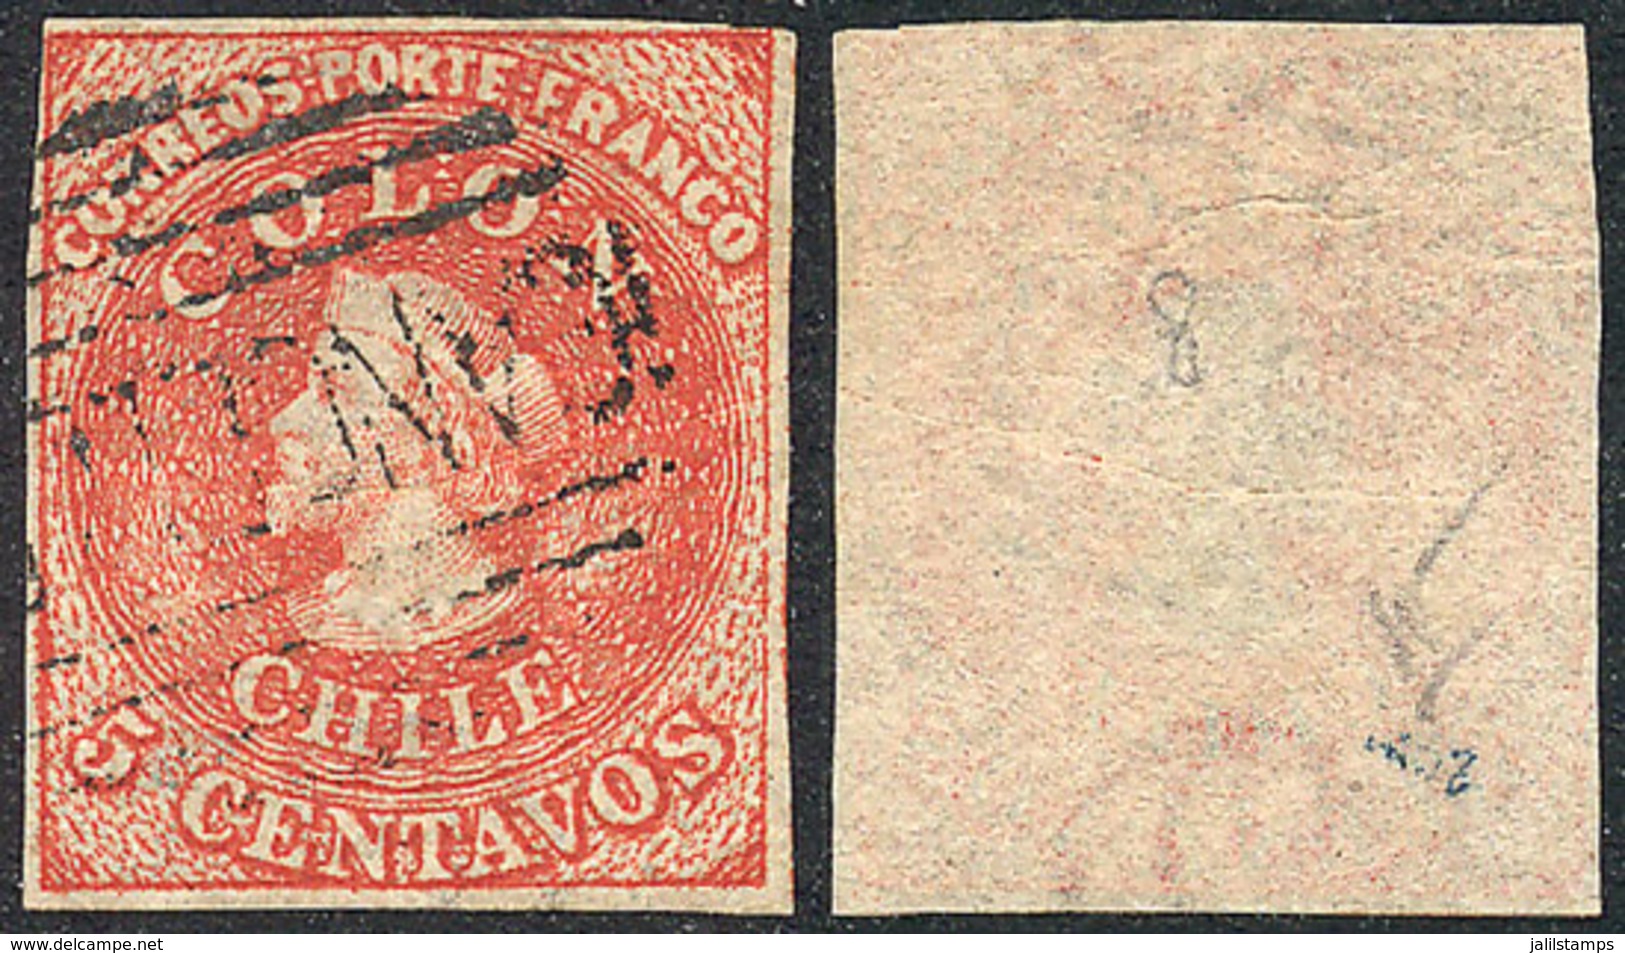 CHILE: Yvert 8, With Variety: Very Shifted Watermark, Half At Top And Half At Bottom, Wide Margins, VF Quality! - Chile